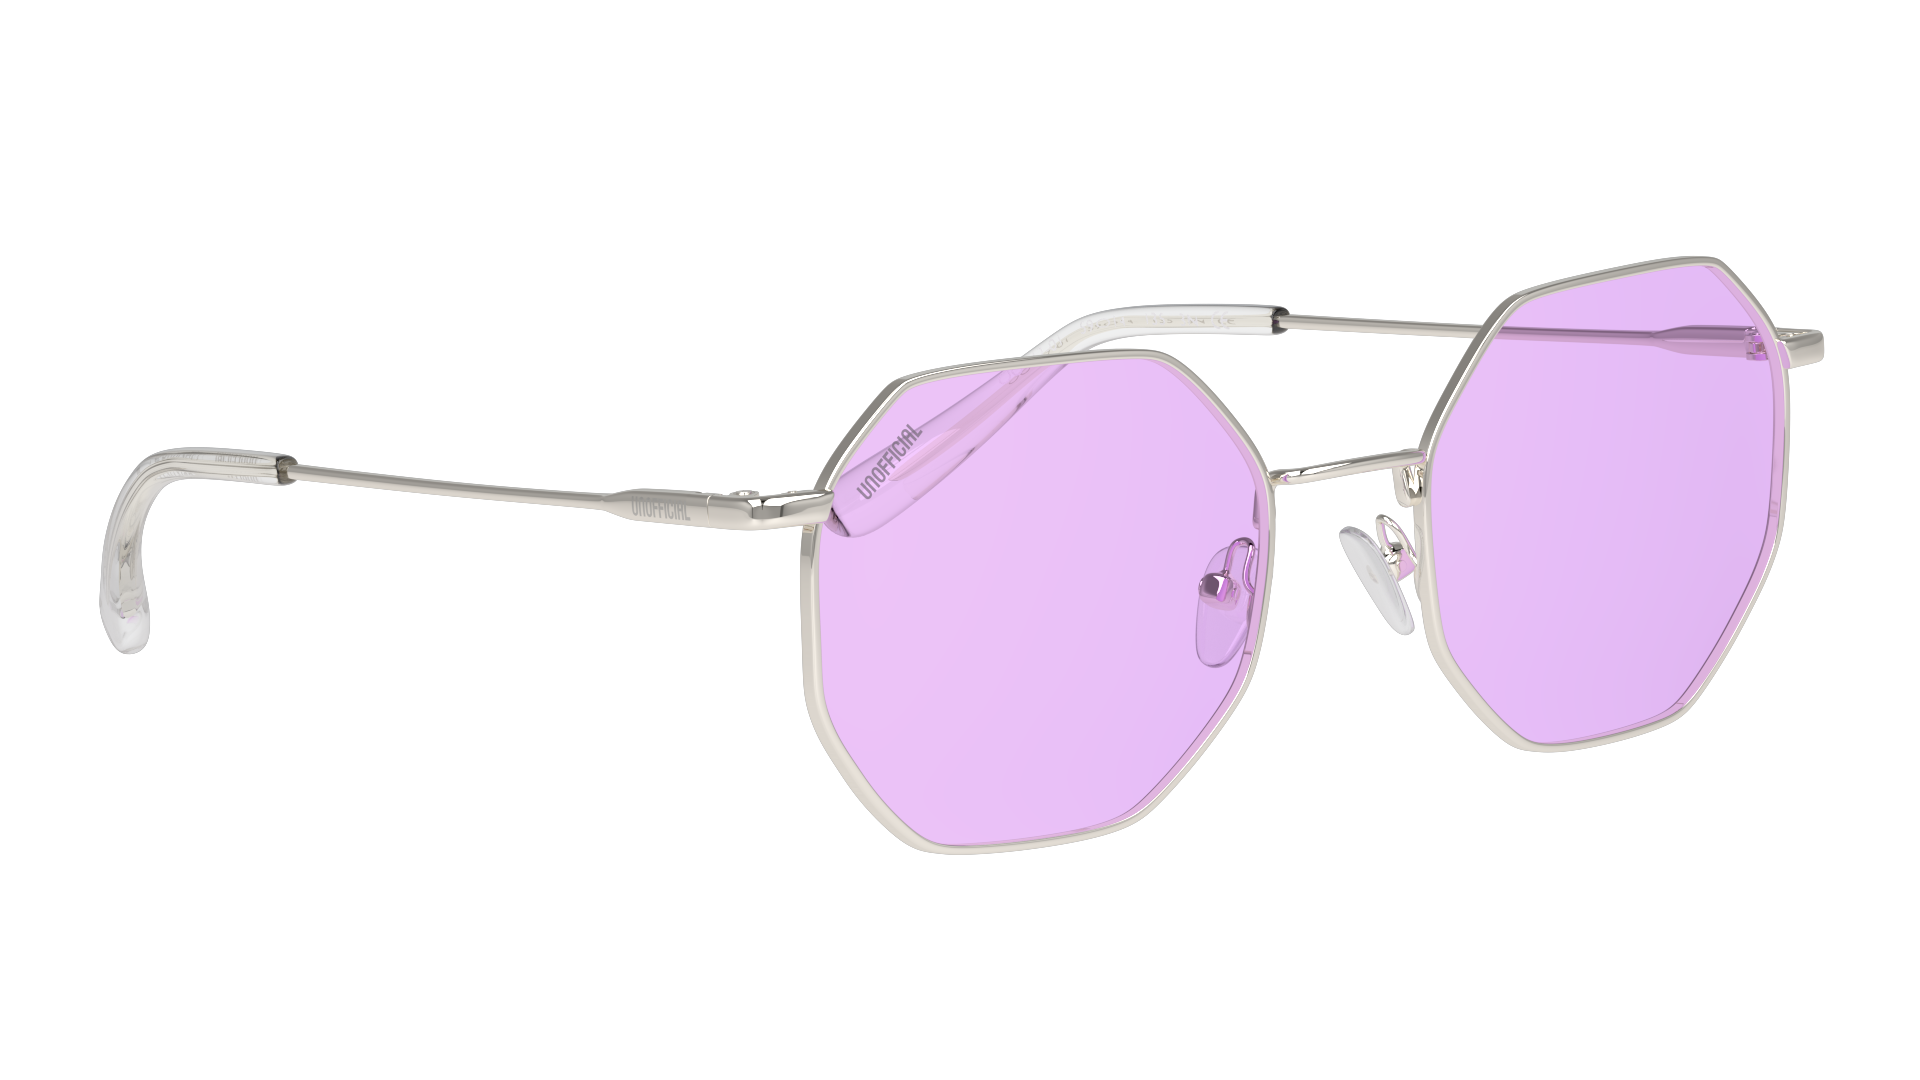 [products.image.angle_right01] Unofficial UNSU0075 Sunglasses